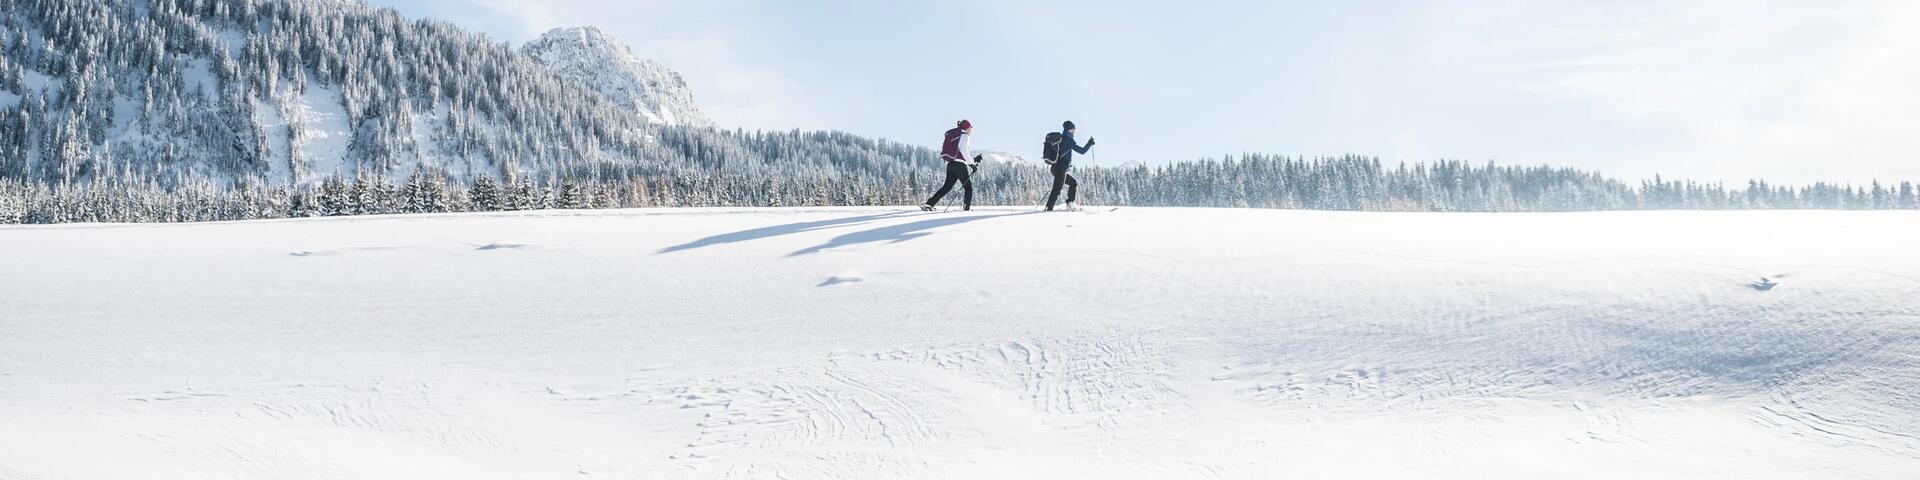 Two people cross-country skiing